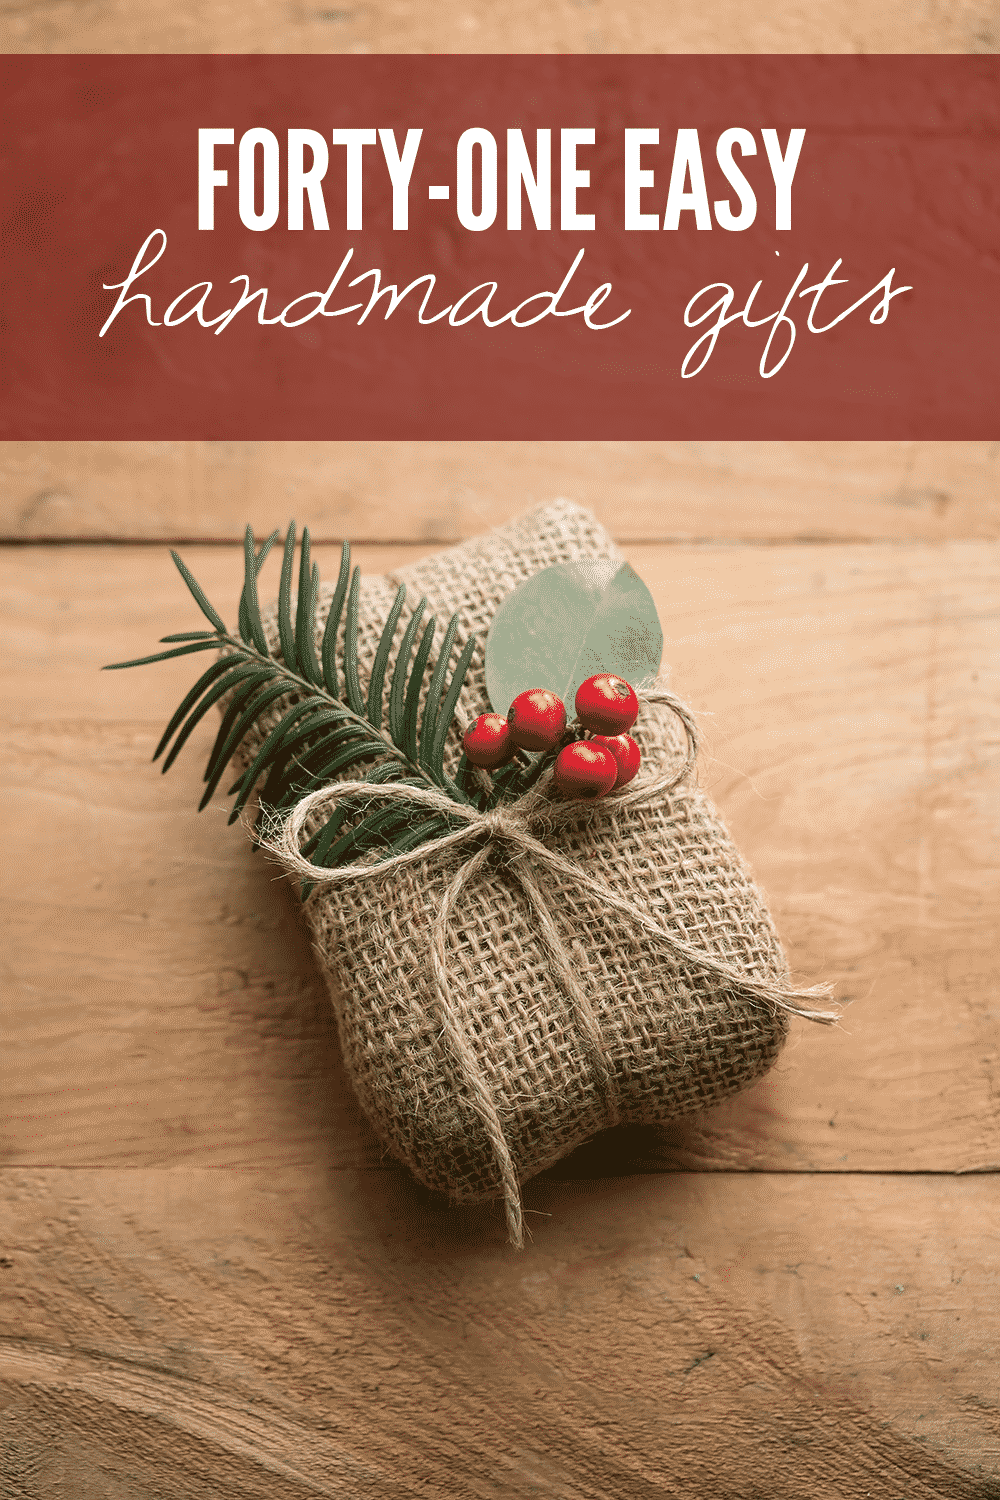 Handmade Gift - 20 Ideas for Everyone on Your List